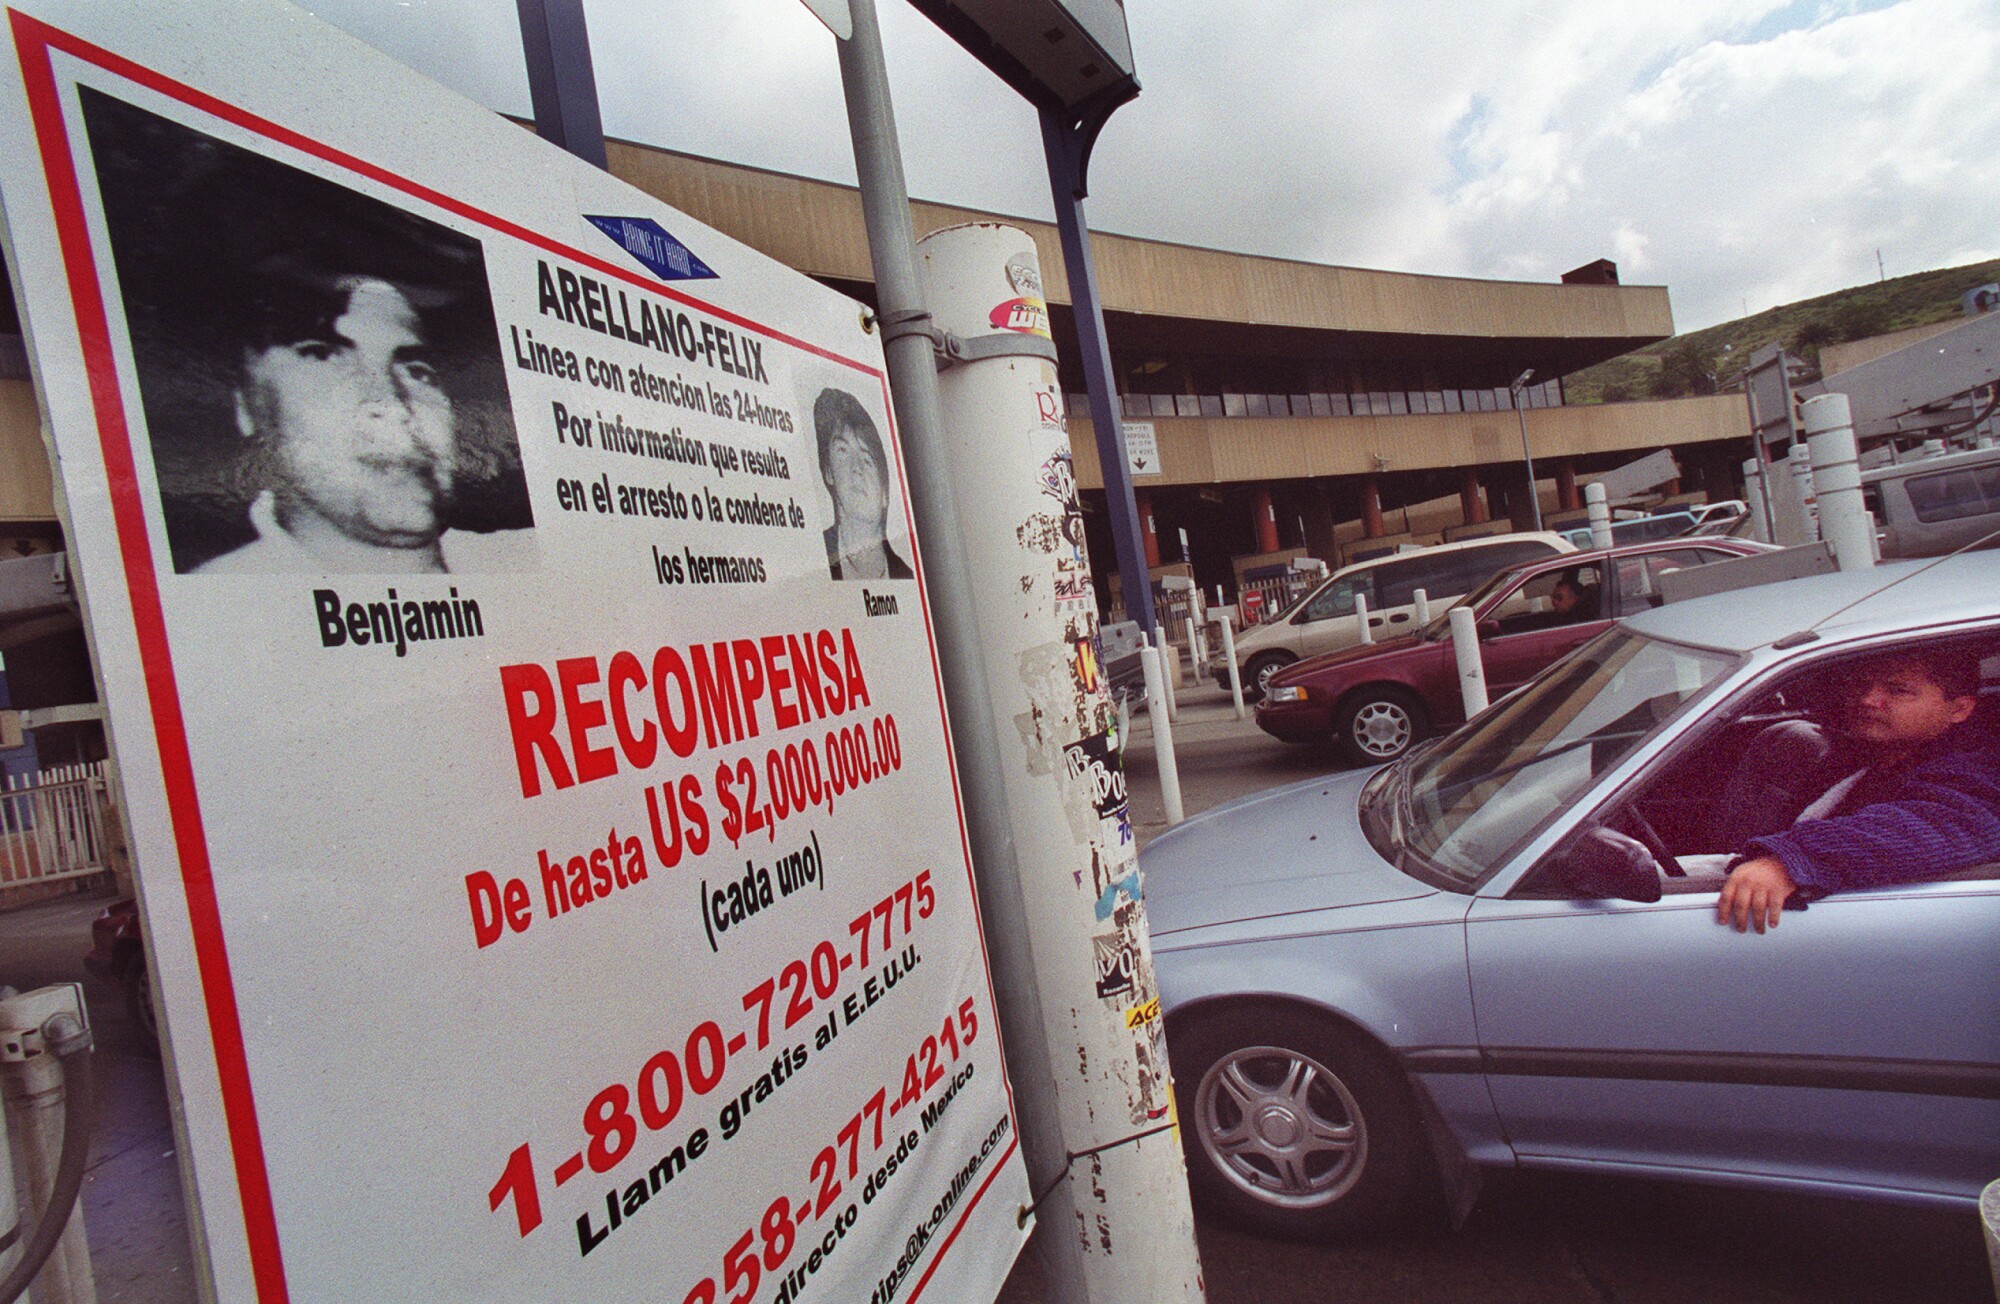 A poster offers information on the Arellano Félix brothers as a reward.